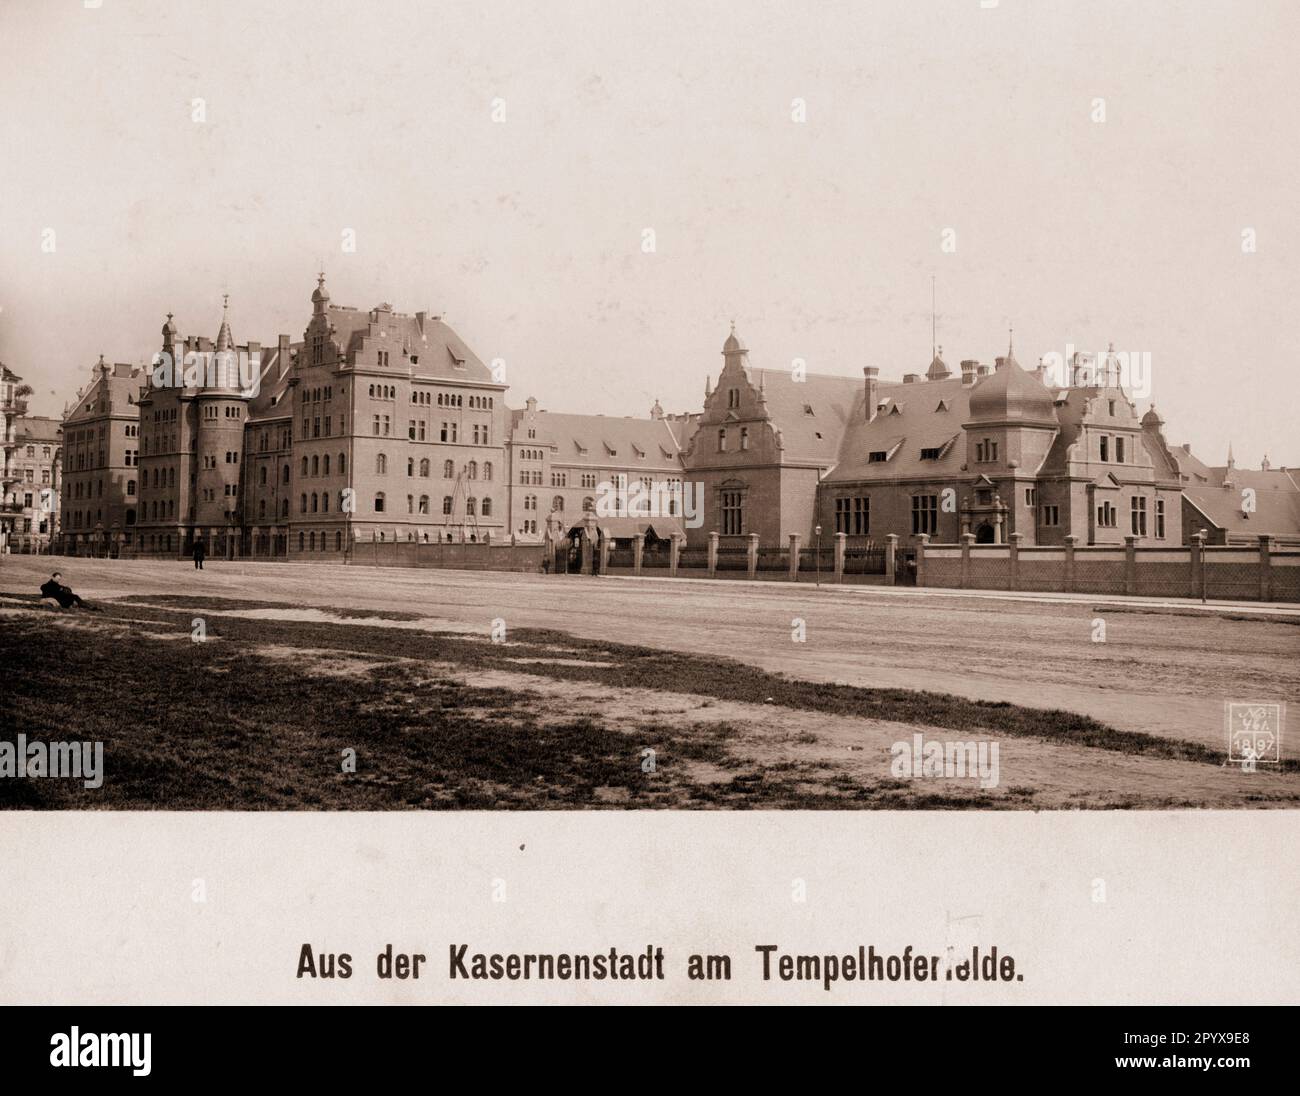 View of the barracks area of the Prussian army at Tempelhofer Feld in Berlin, which was military property between 1828 and 1910. [automated translation] Stock Photo